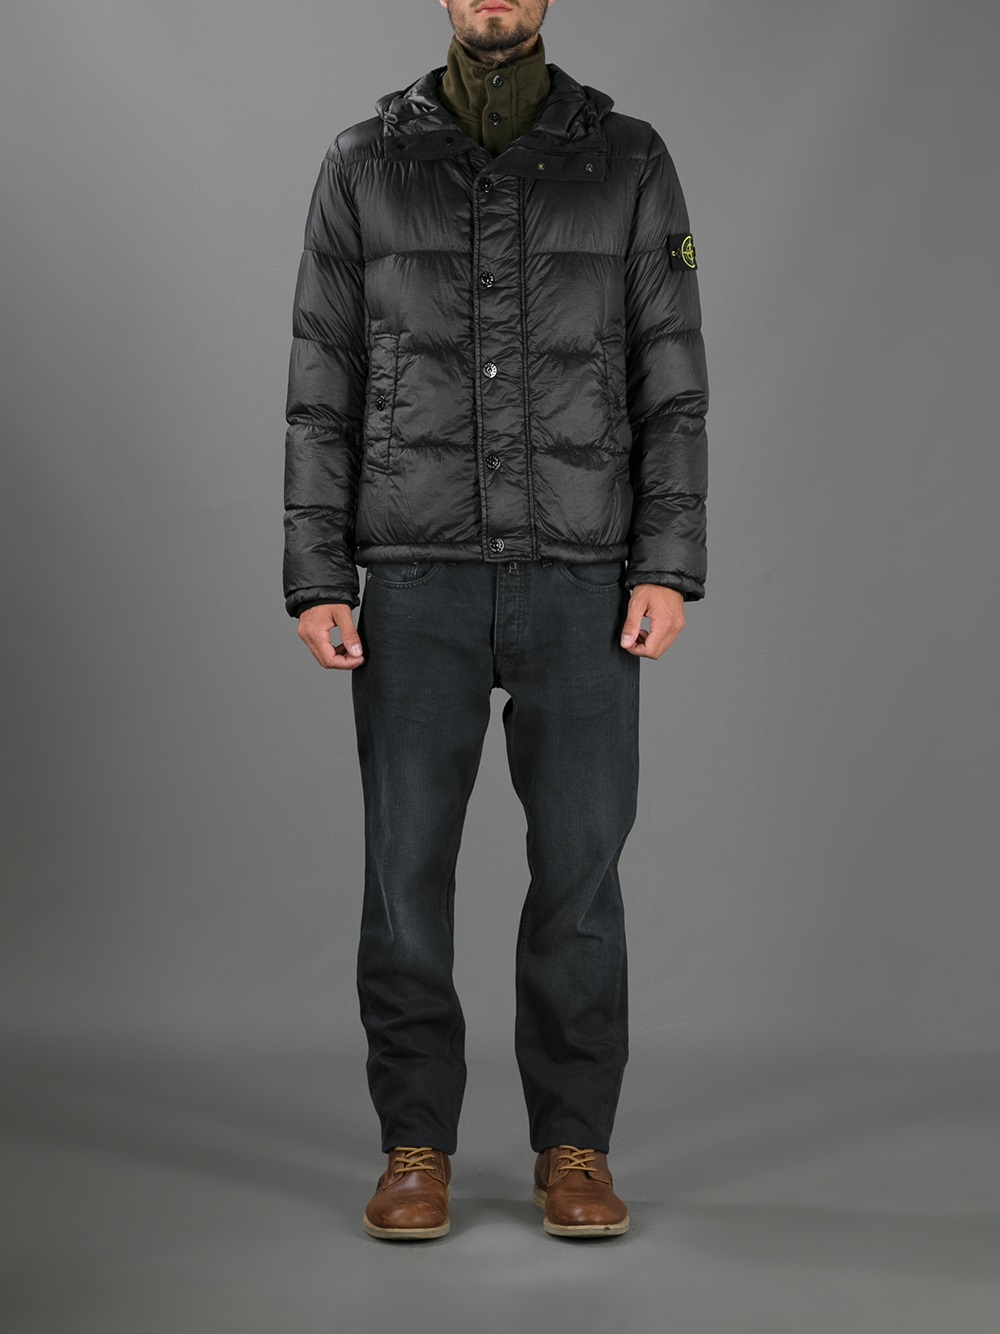 Stone Island Padded Jacket in Black for Men | Lyst